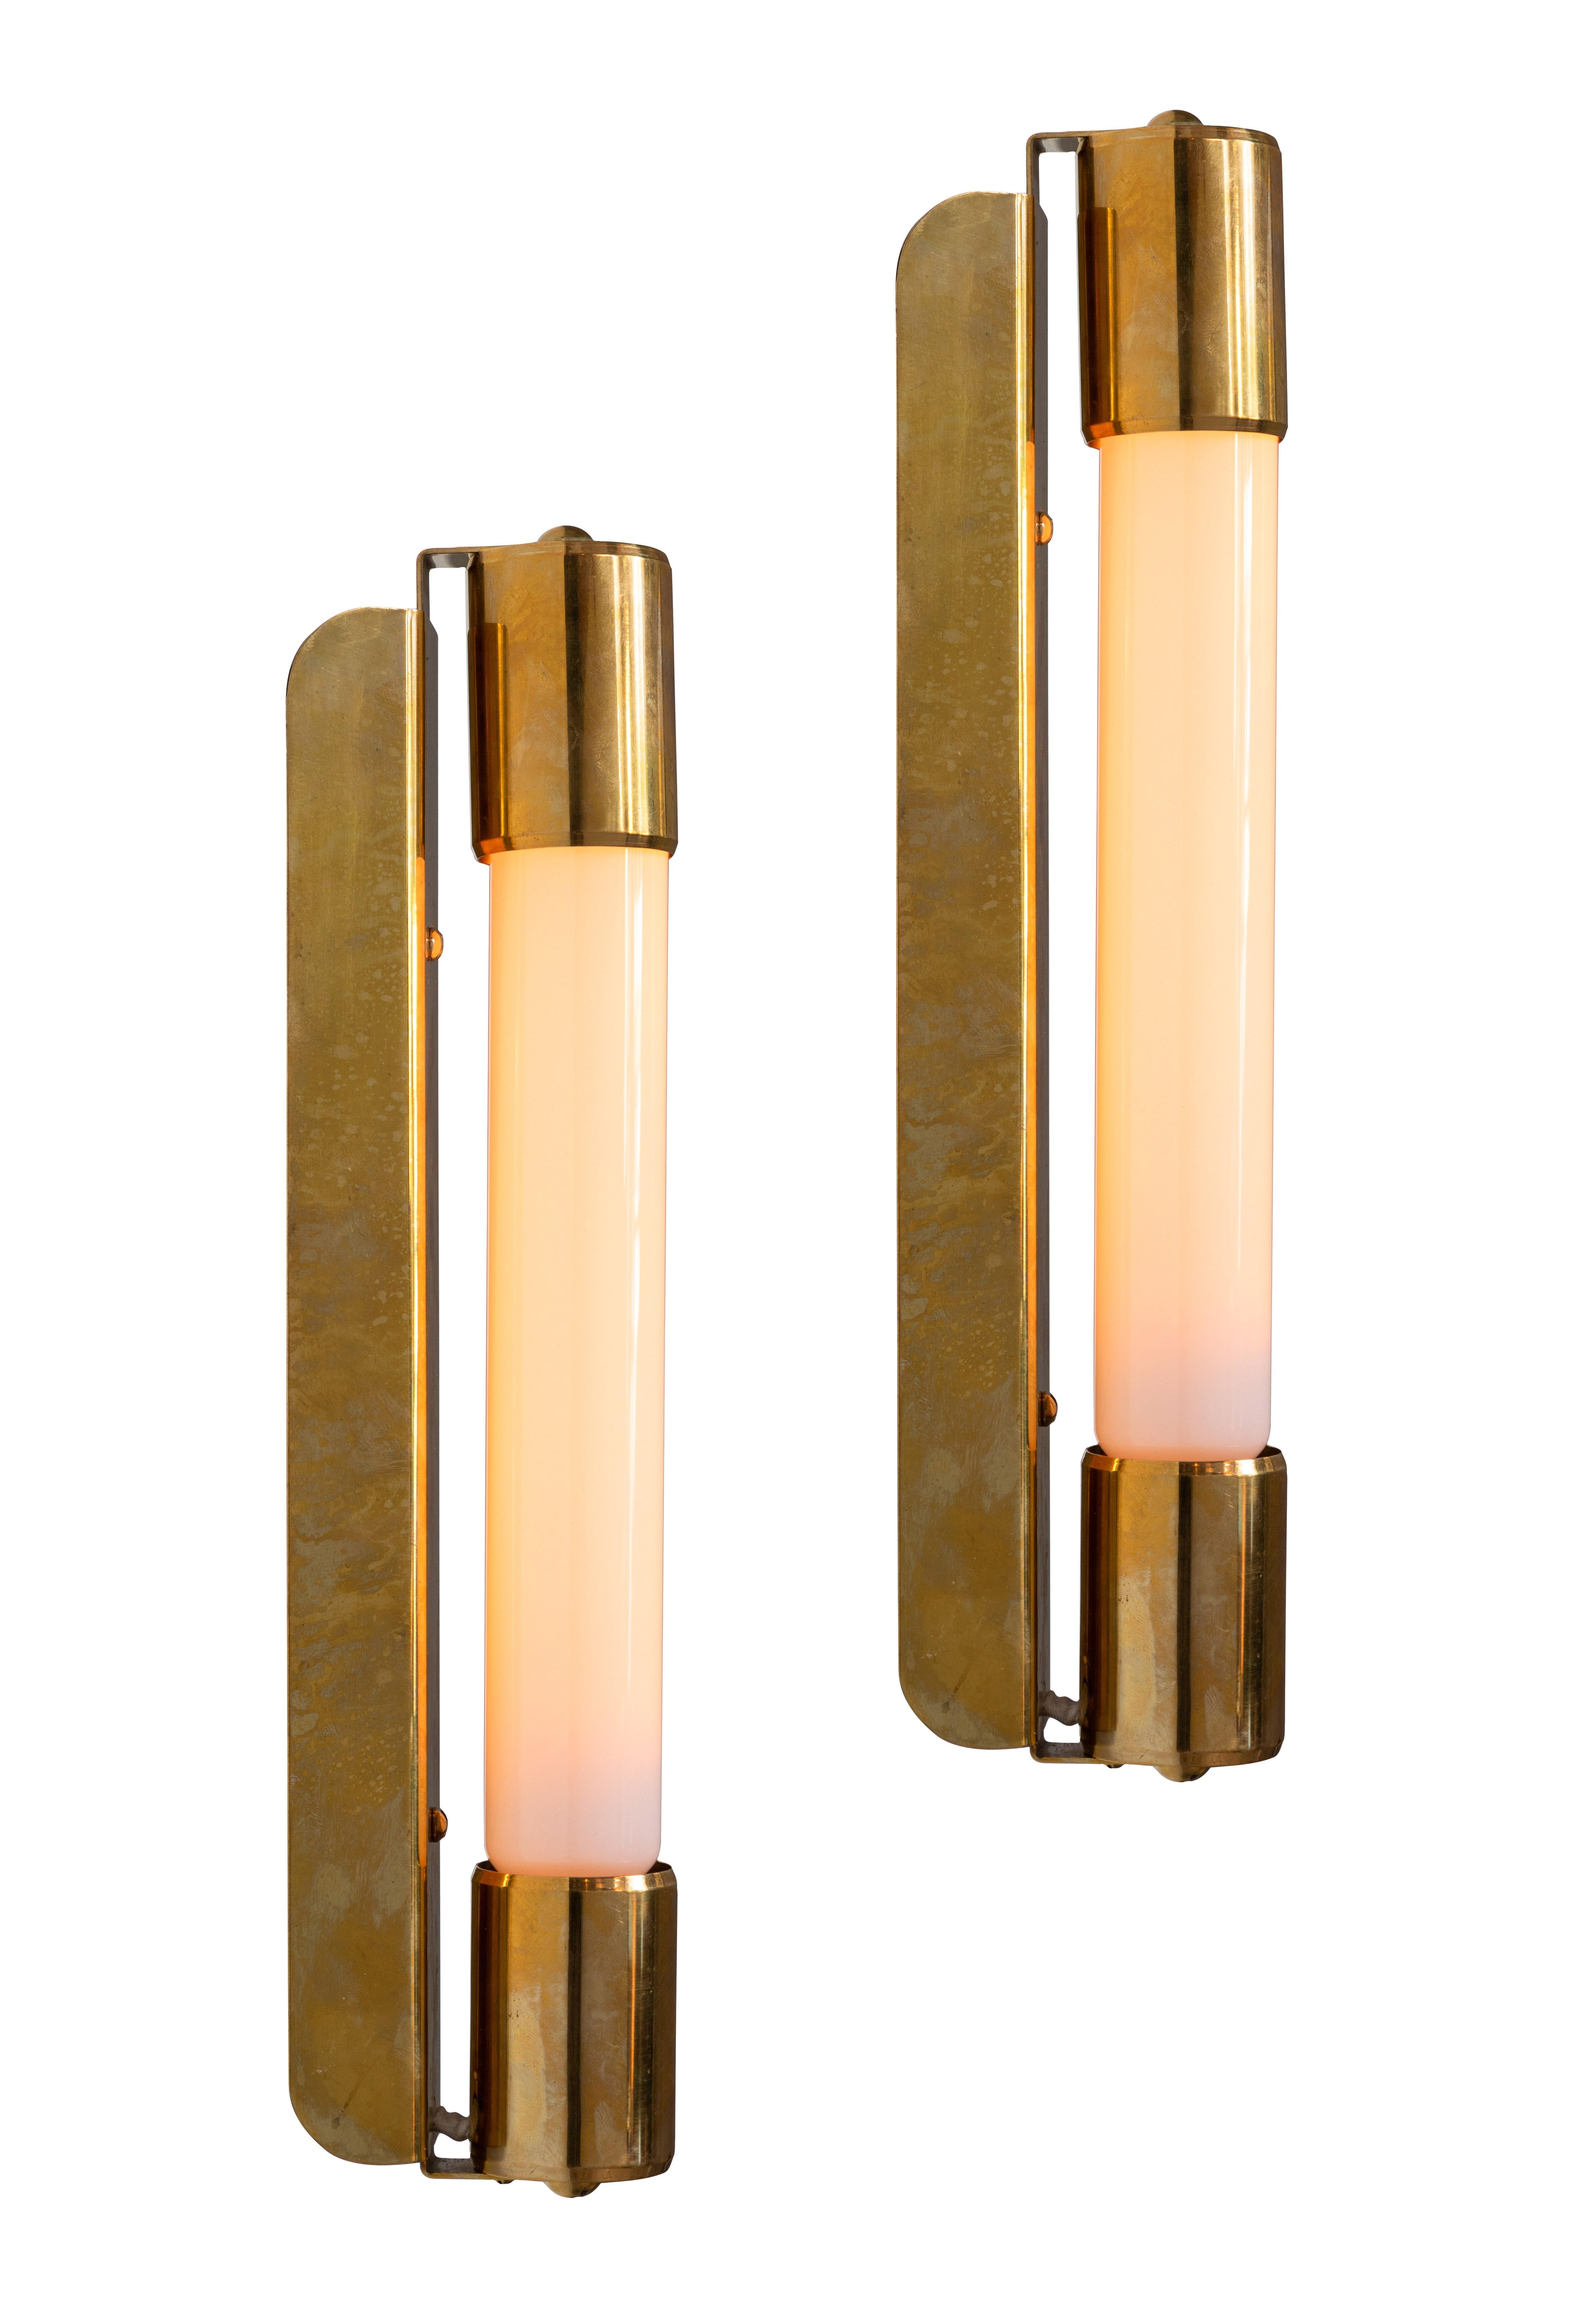 Pair of 1950s Mauri Almari Model No. 71032 Wall Lamps for Idman. A rare example executed in solid brass, with manufacturer's stamp. Highly reminiscent of Paavo Tynell's iconic designs for Taito Oy. An incredibly refined design that is